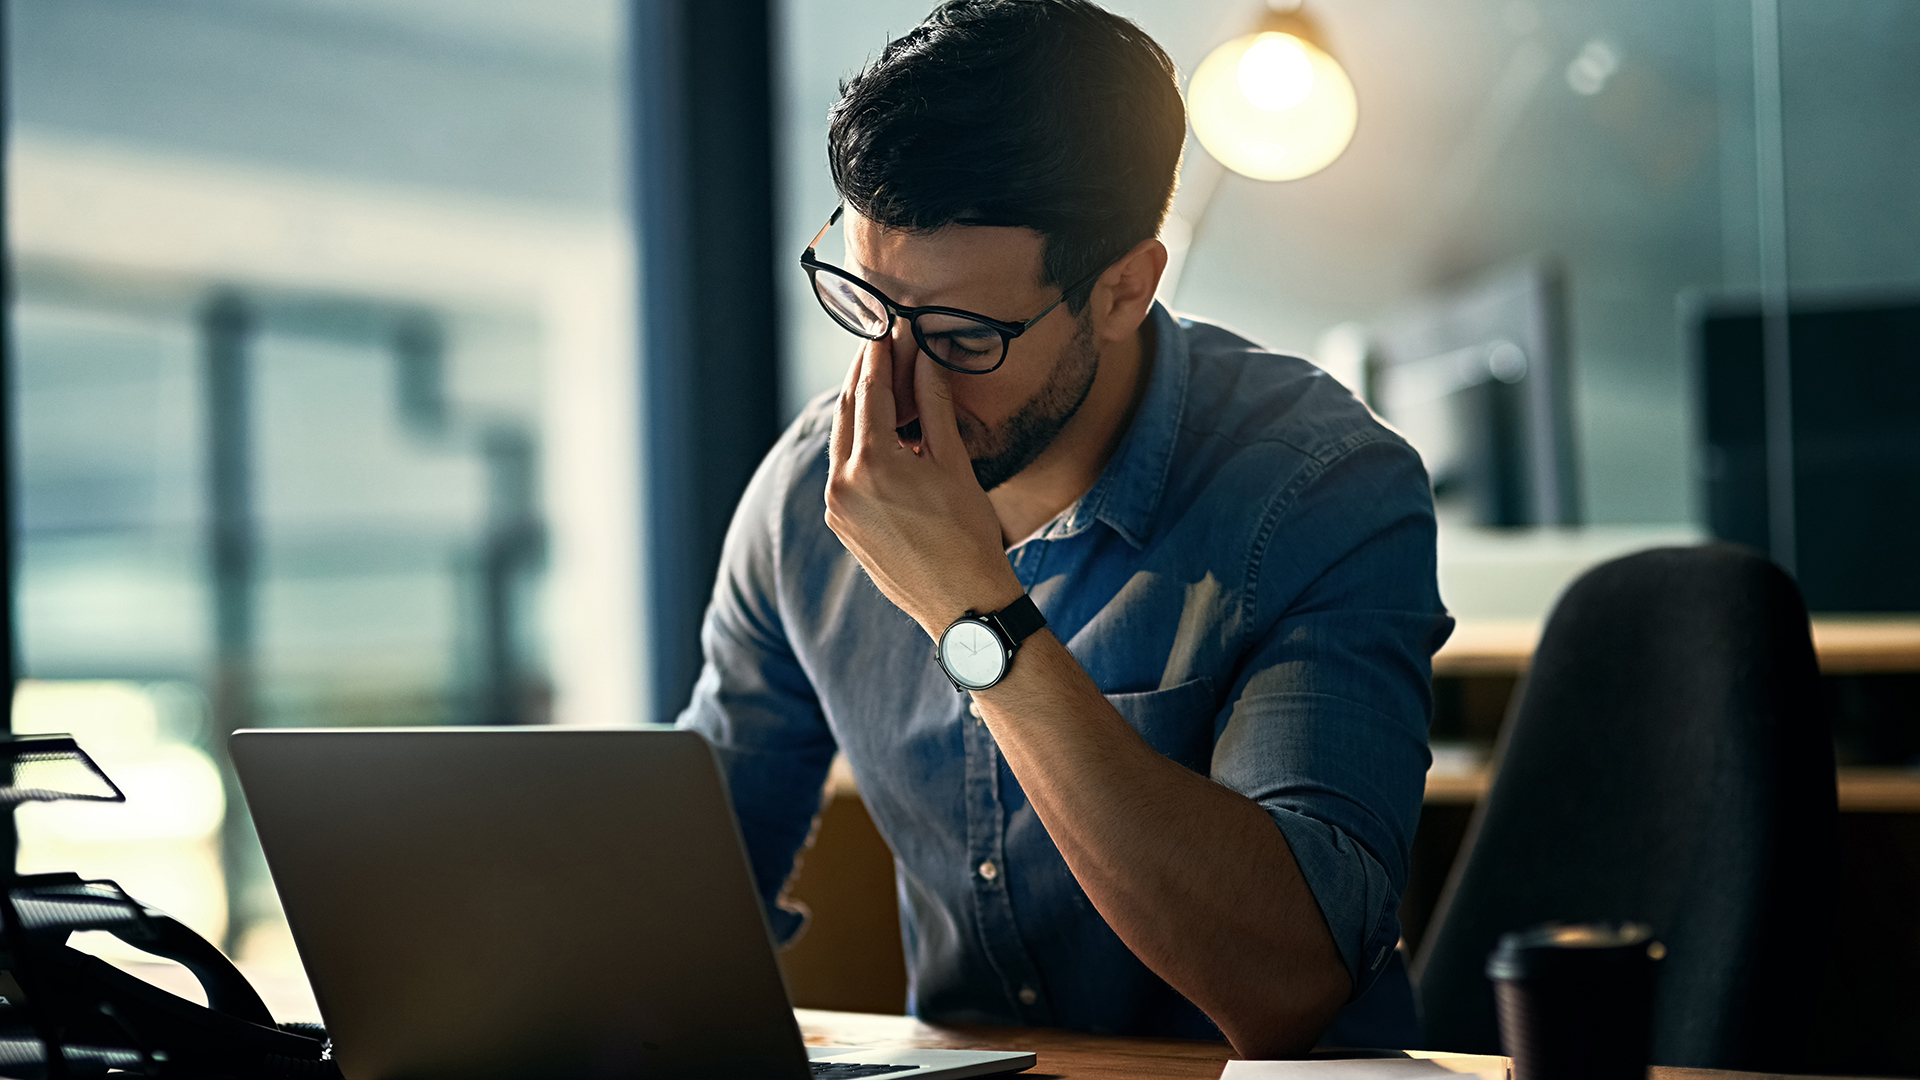 Healthworks: Workplace Stress and Tips to Avoid It 